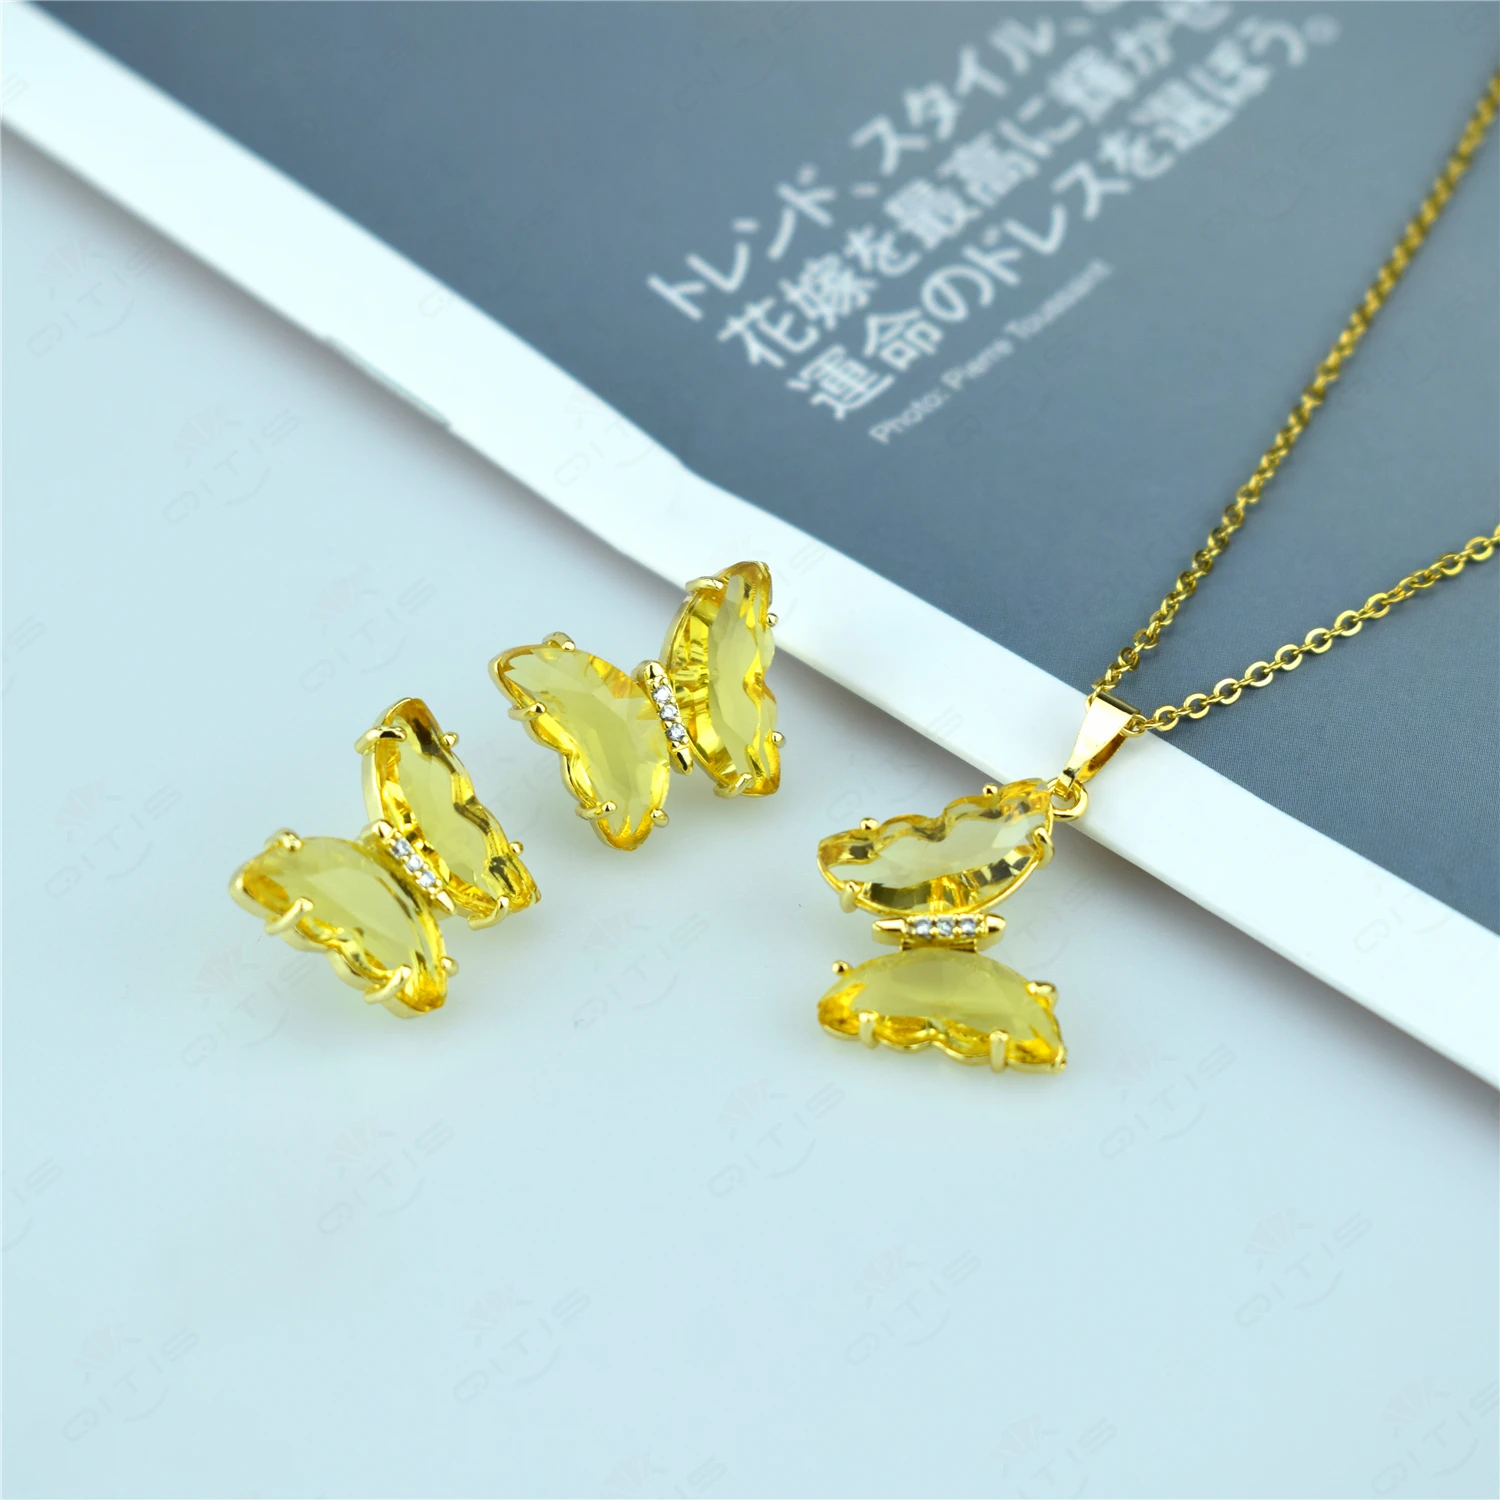 latest fashion necklace designs 2021 New Fashion Hot-selling Butterfly Crystal Necklace AAA Micro-set Zircon Stud Earrings Jewelry Gift Wholesale Direct Mail fashion pearl necklace Fashion Jewelry Sets